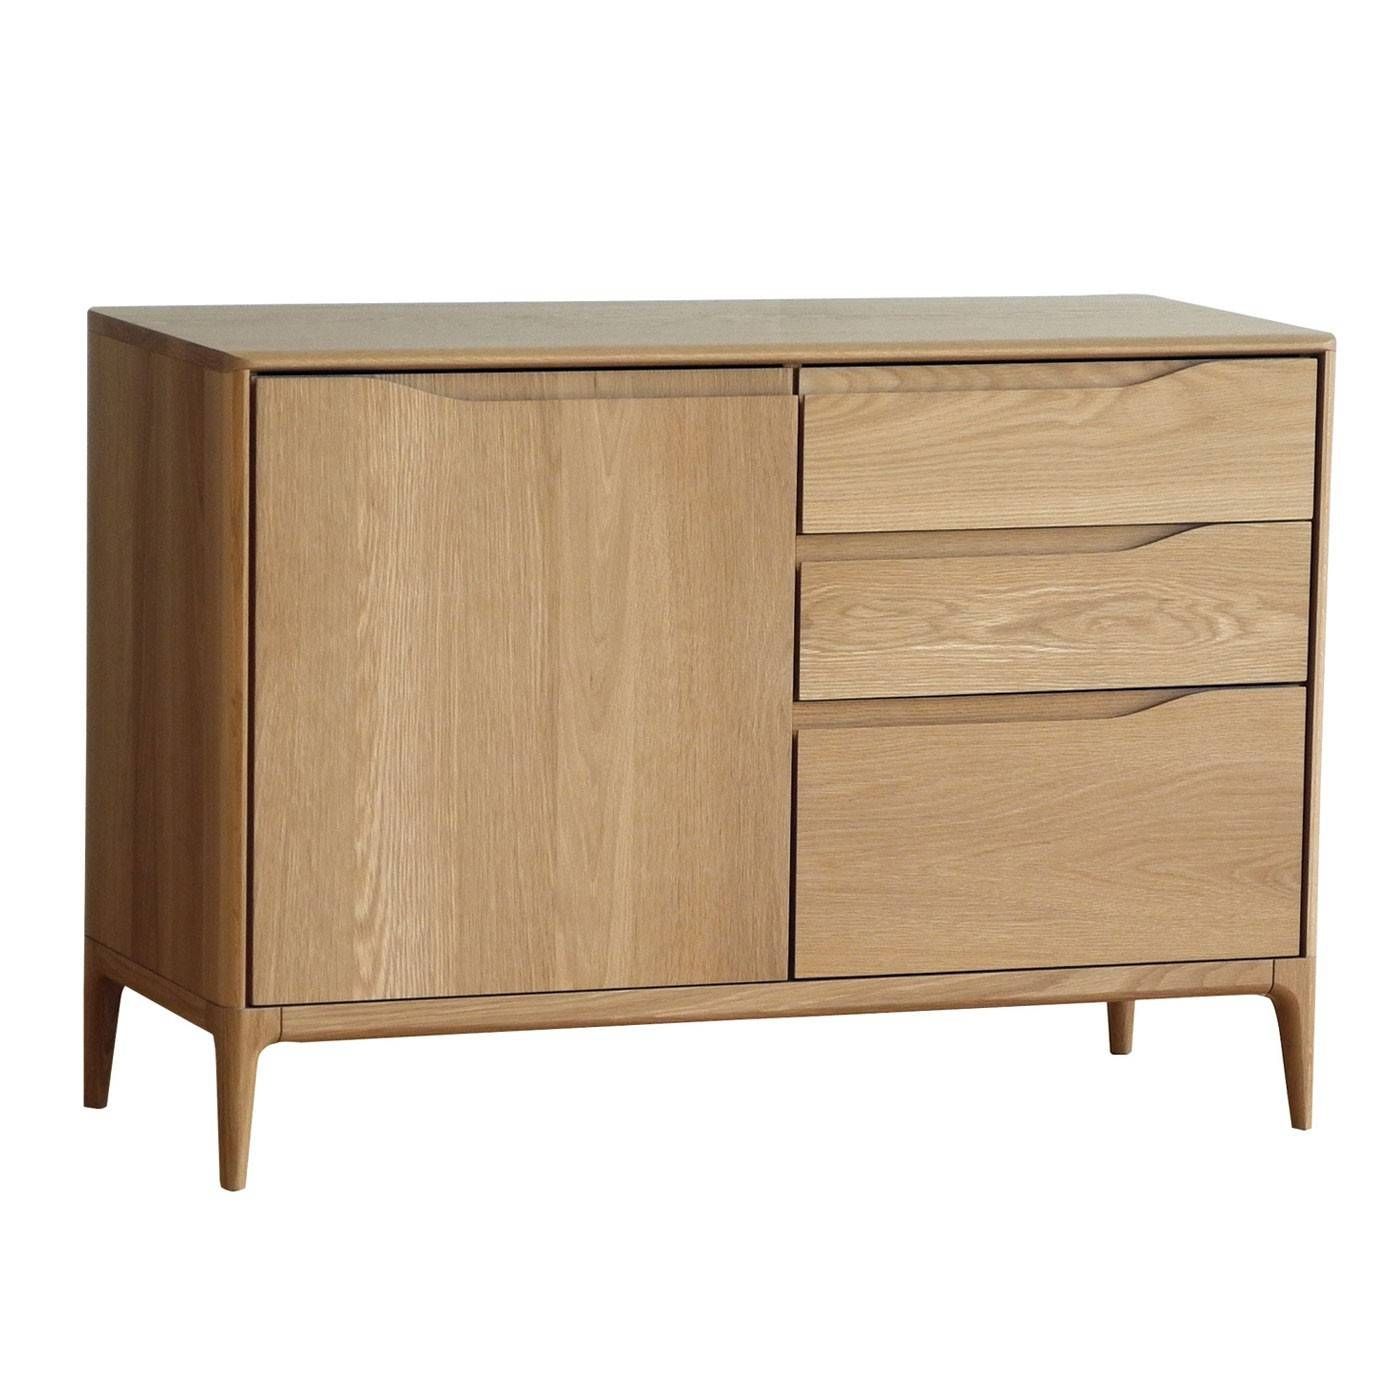 Ercol Romana Small Sideboard Oak In Small Sideboard With Drawers (View 20 of 20)